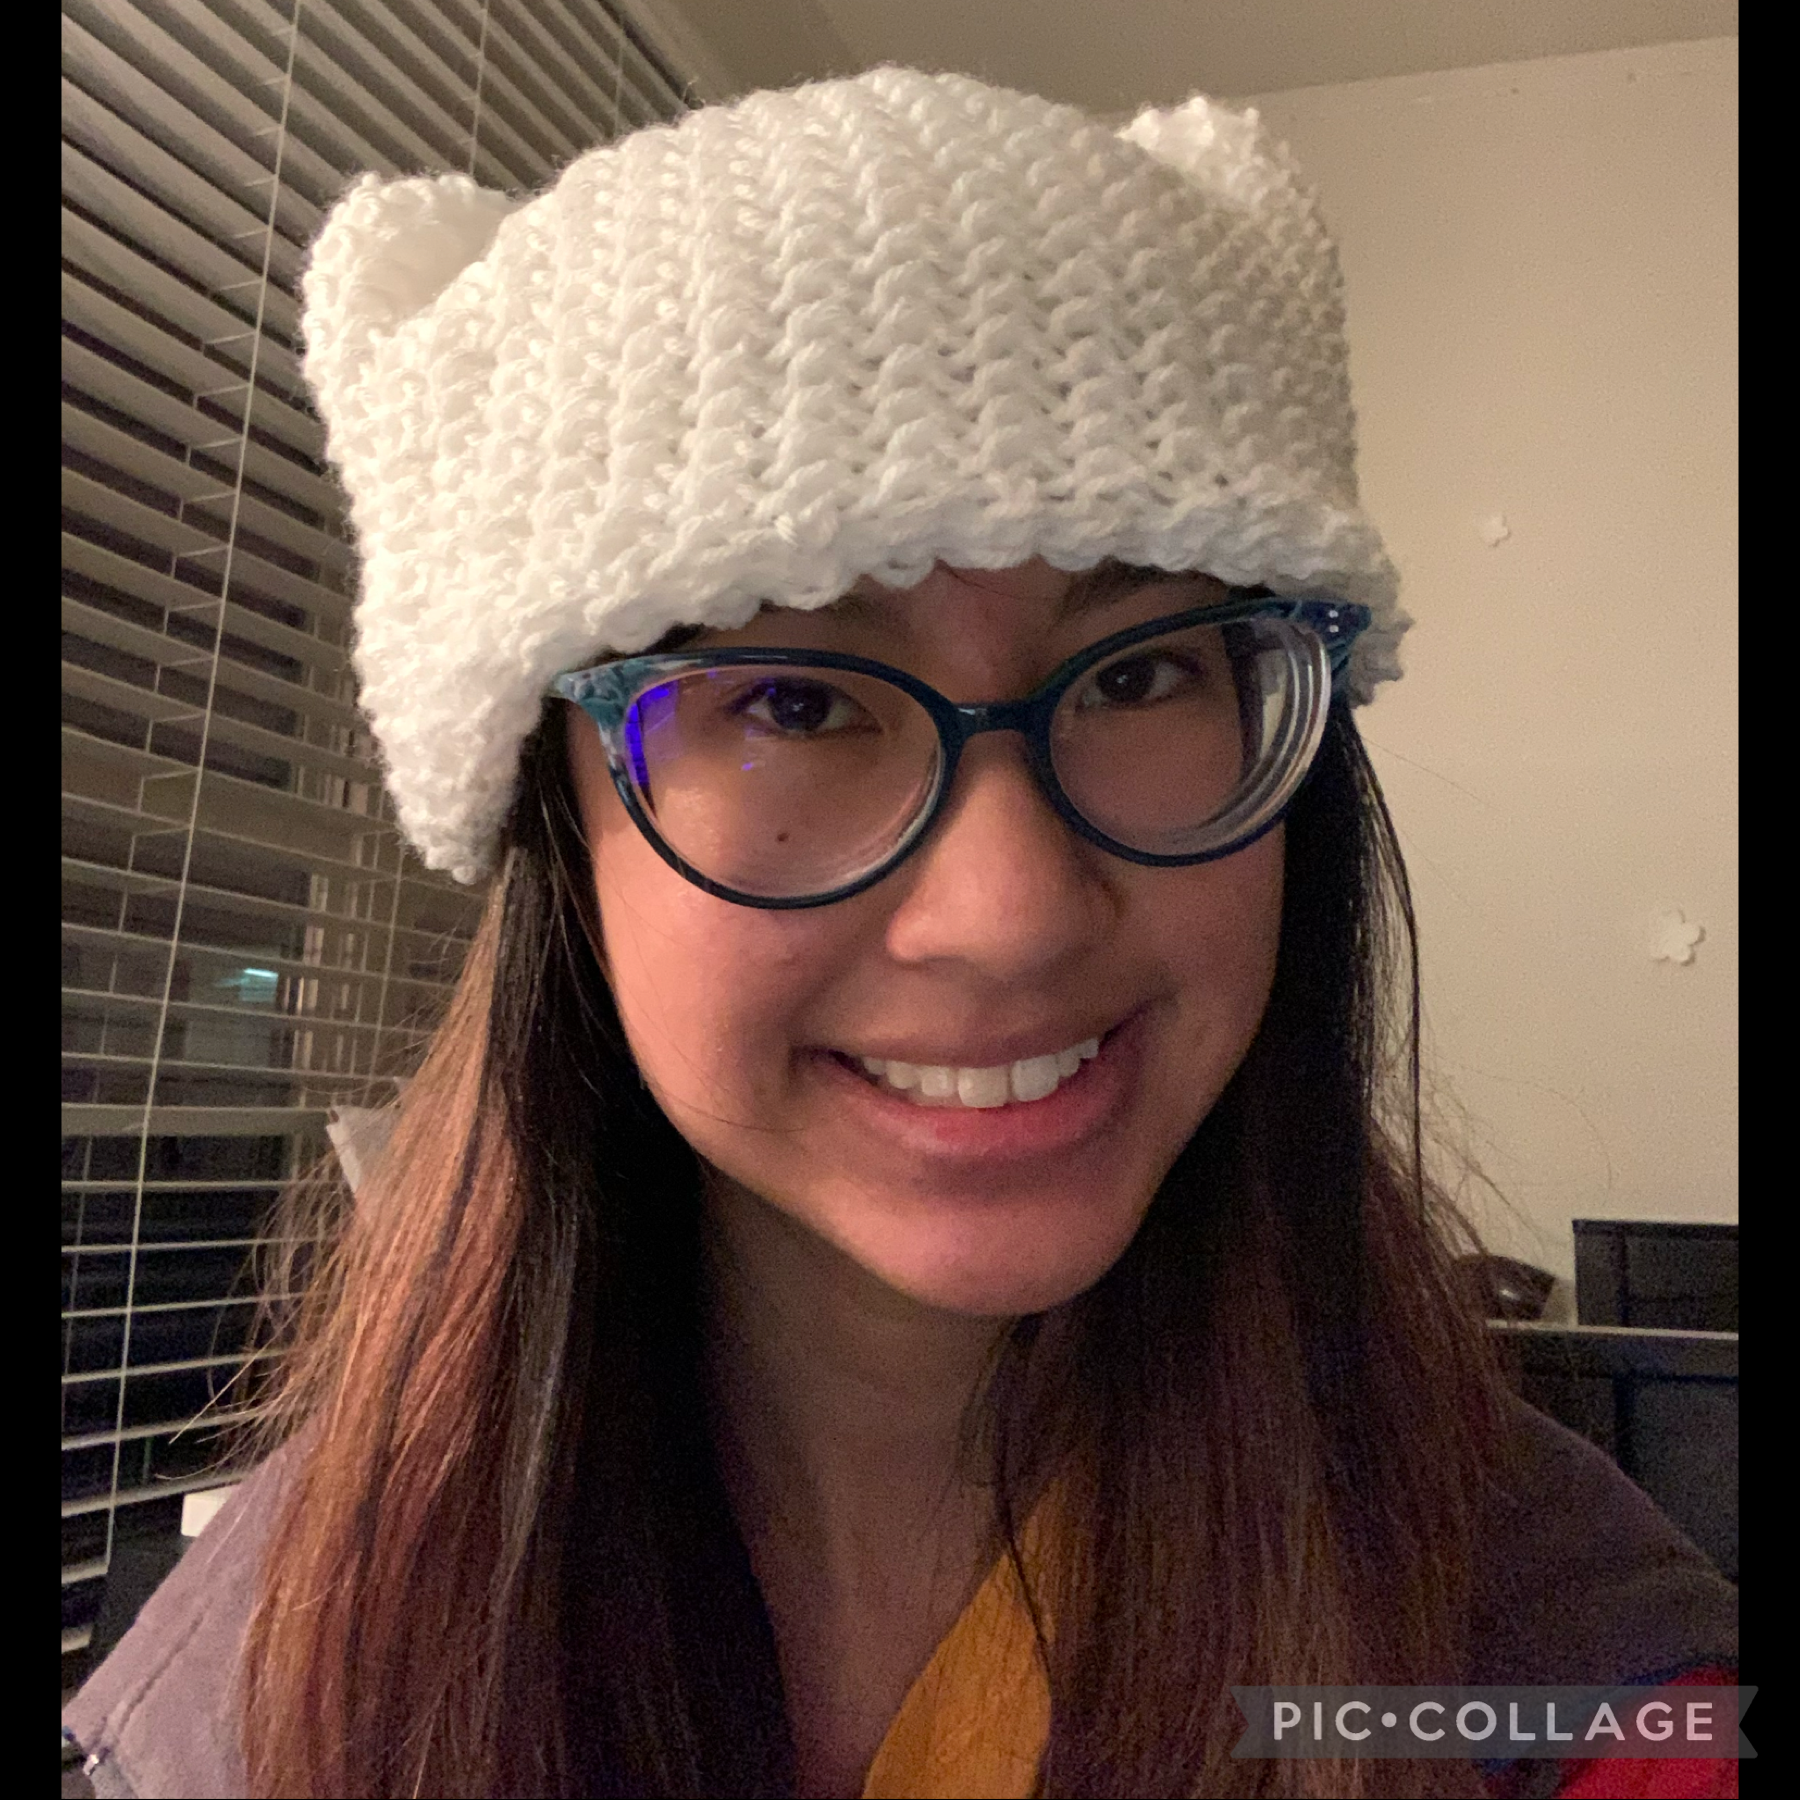 Not a drawing, but I knit this cool hat